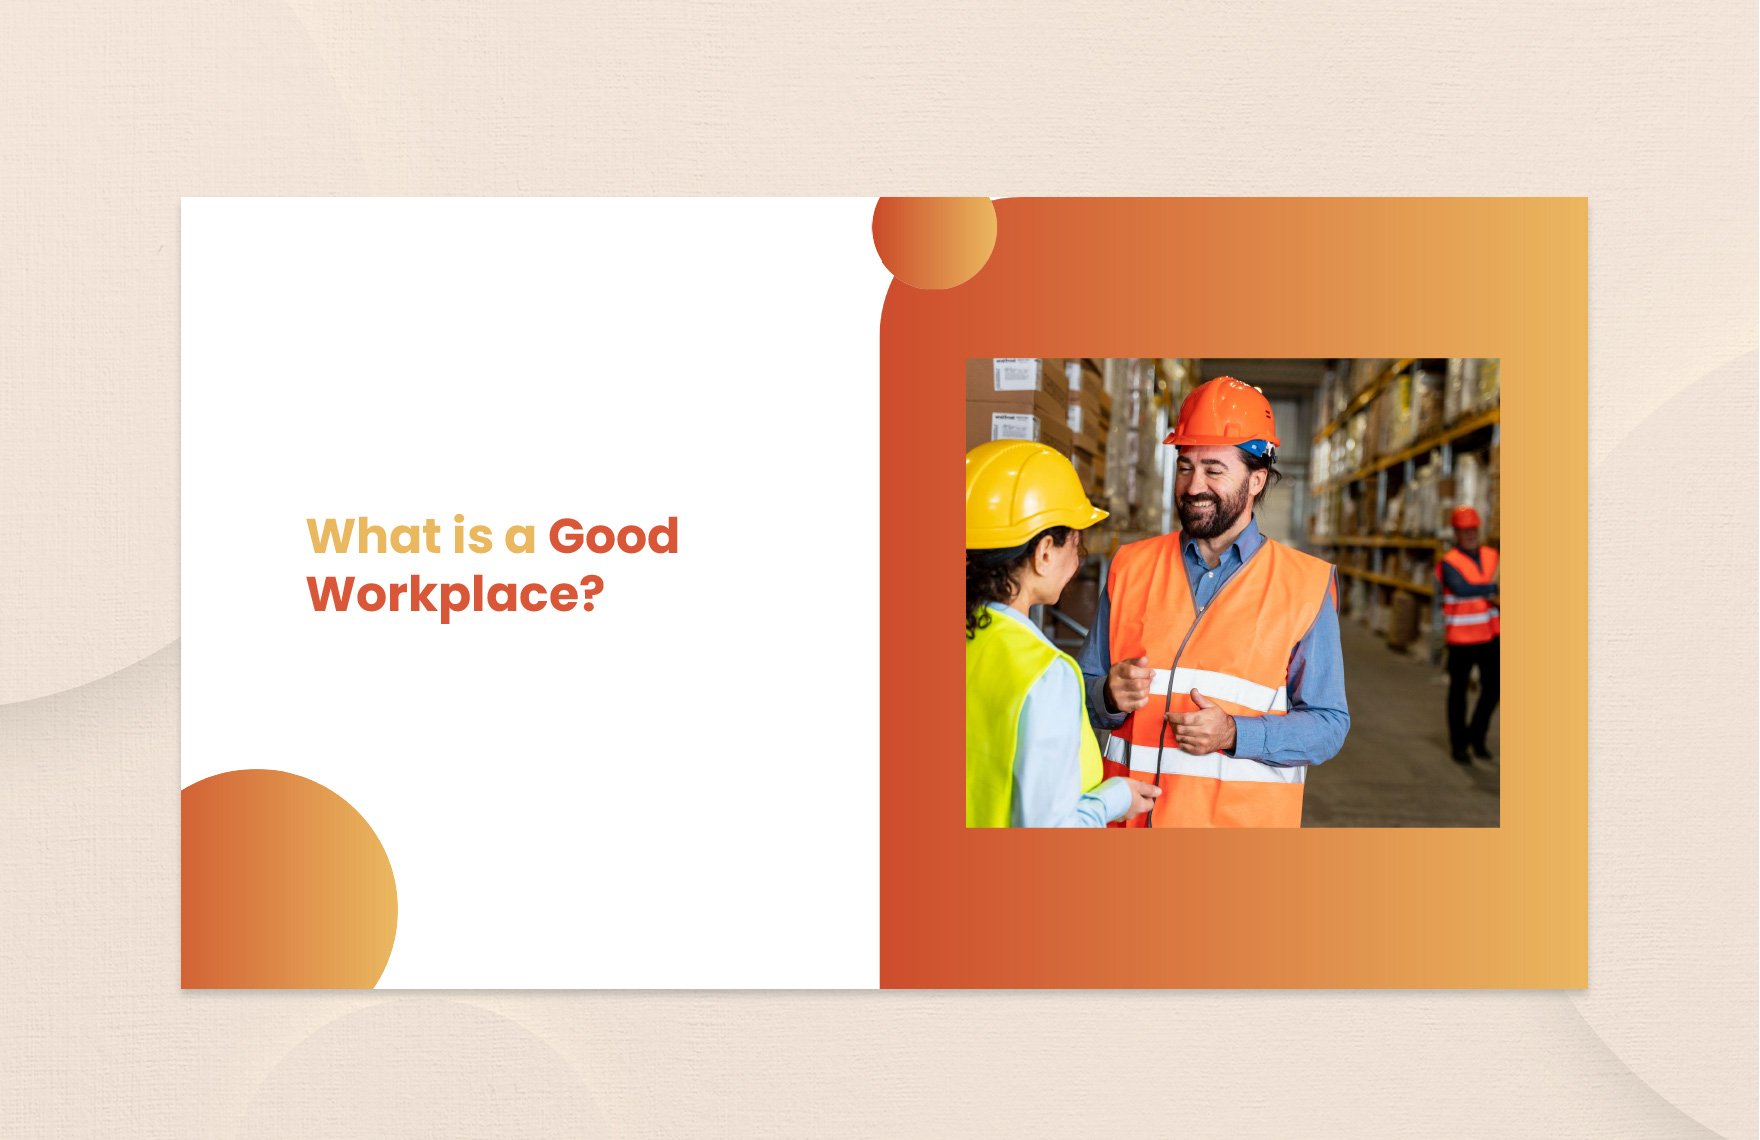 Workplace Safety and Risk Management Presentation Template